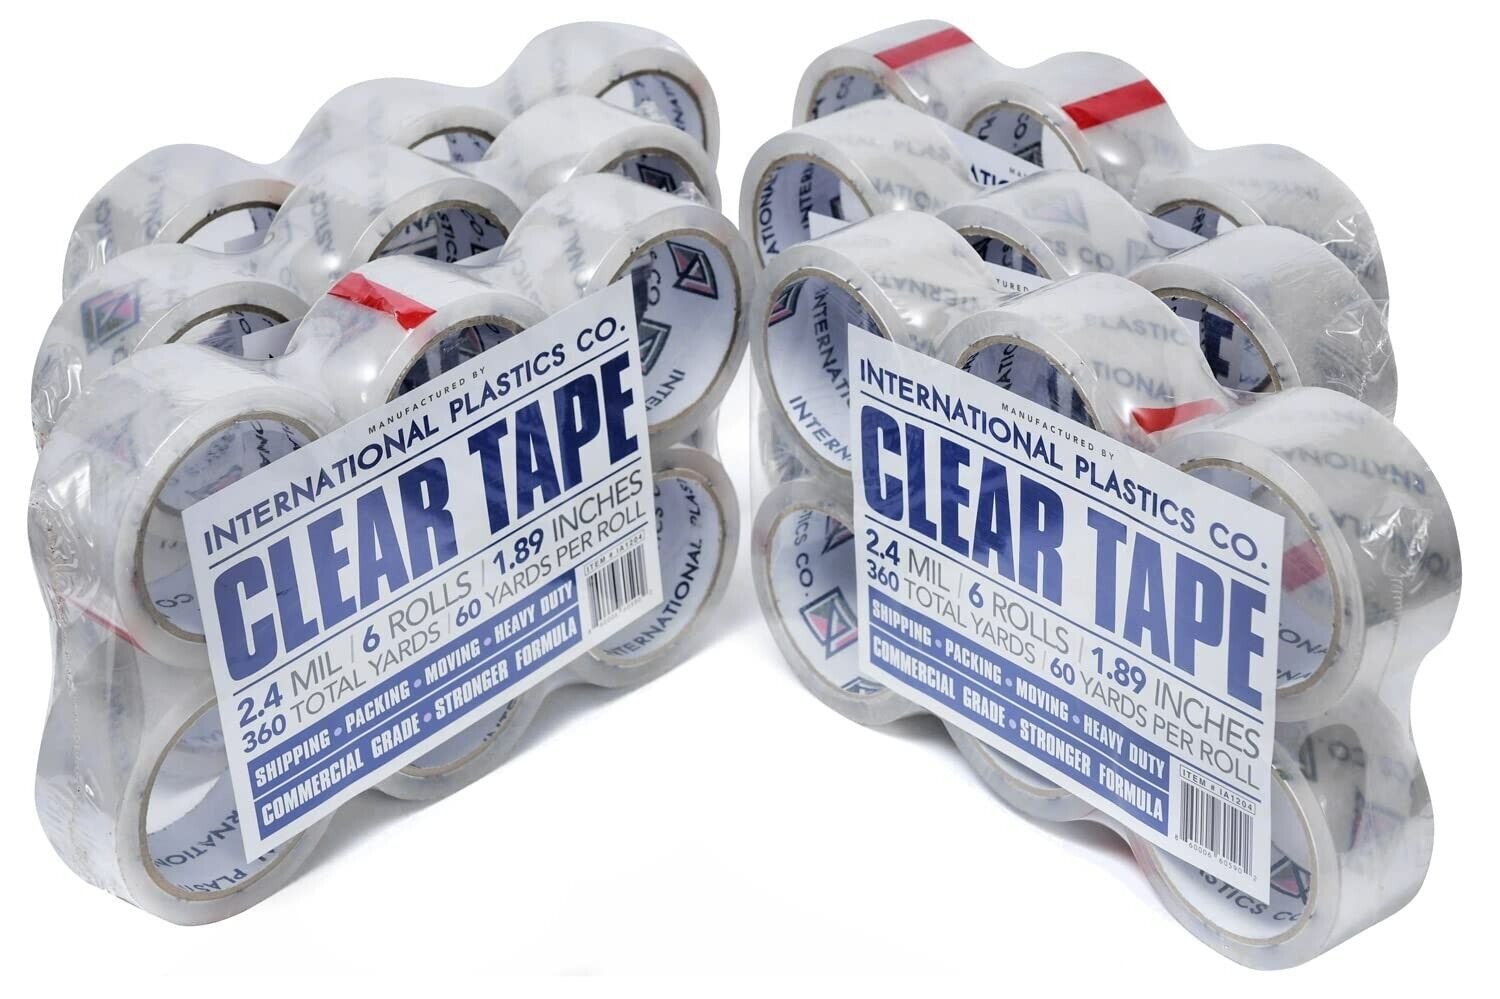 Heavy Duty Packing Tape 1.88 Inch x 60 Yards, 36 Rolls, Strong Seal, Clear